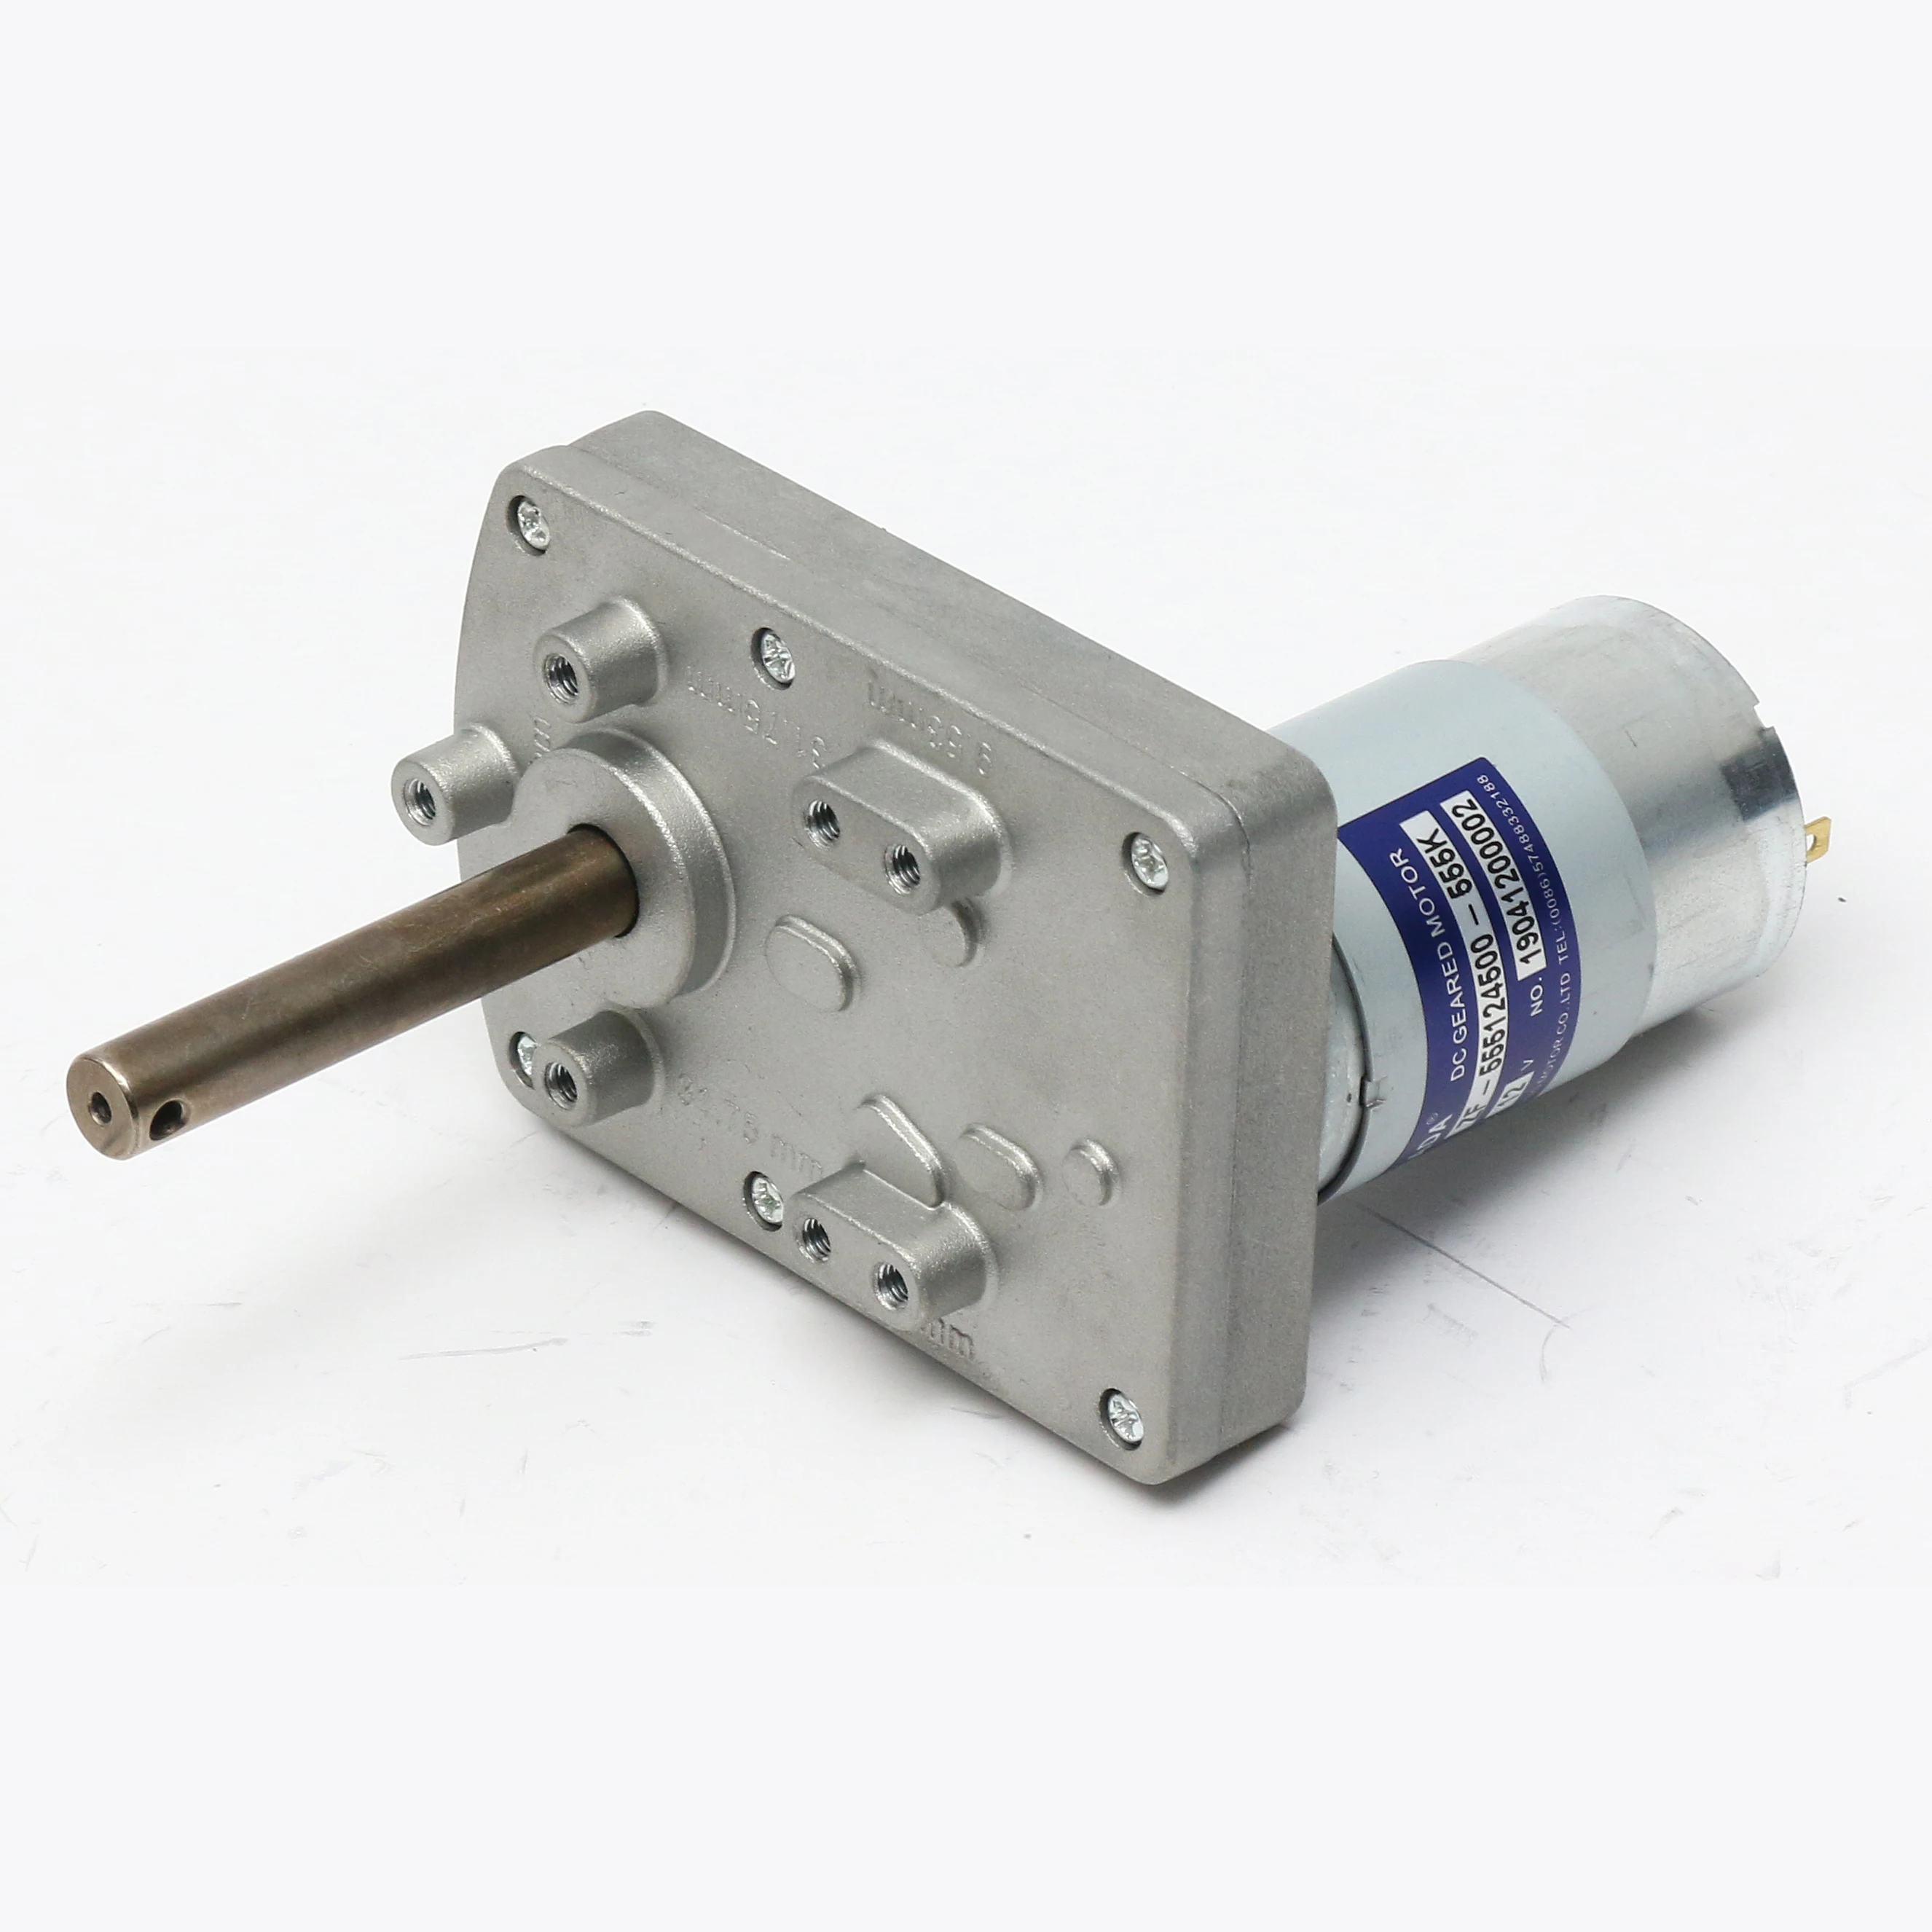 DC Gear Motor, Electric Motor, Other Machinery -Alibaba.com